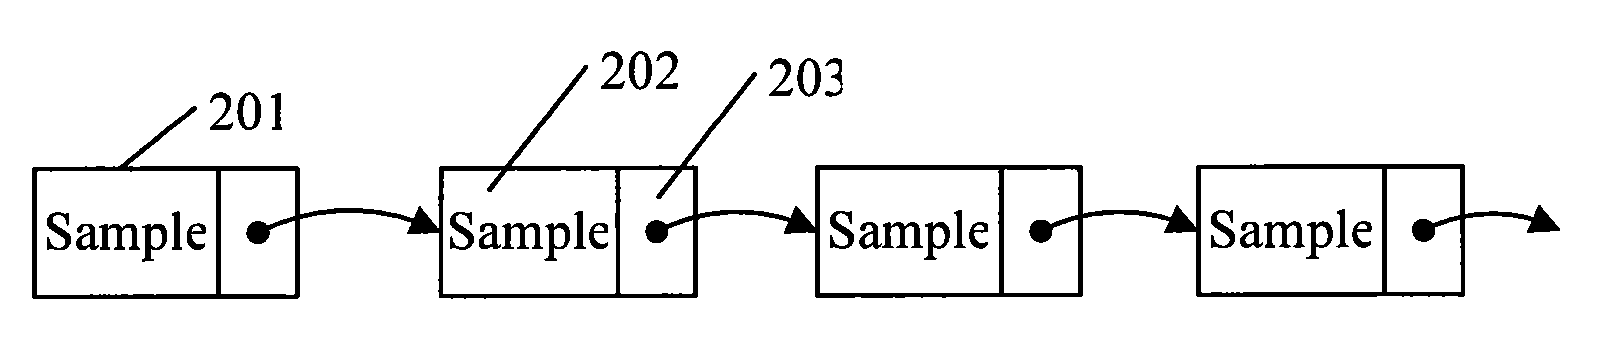 Method and device for editing video file